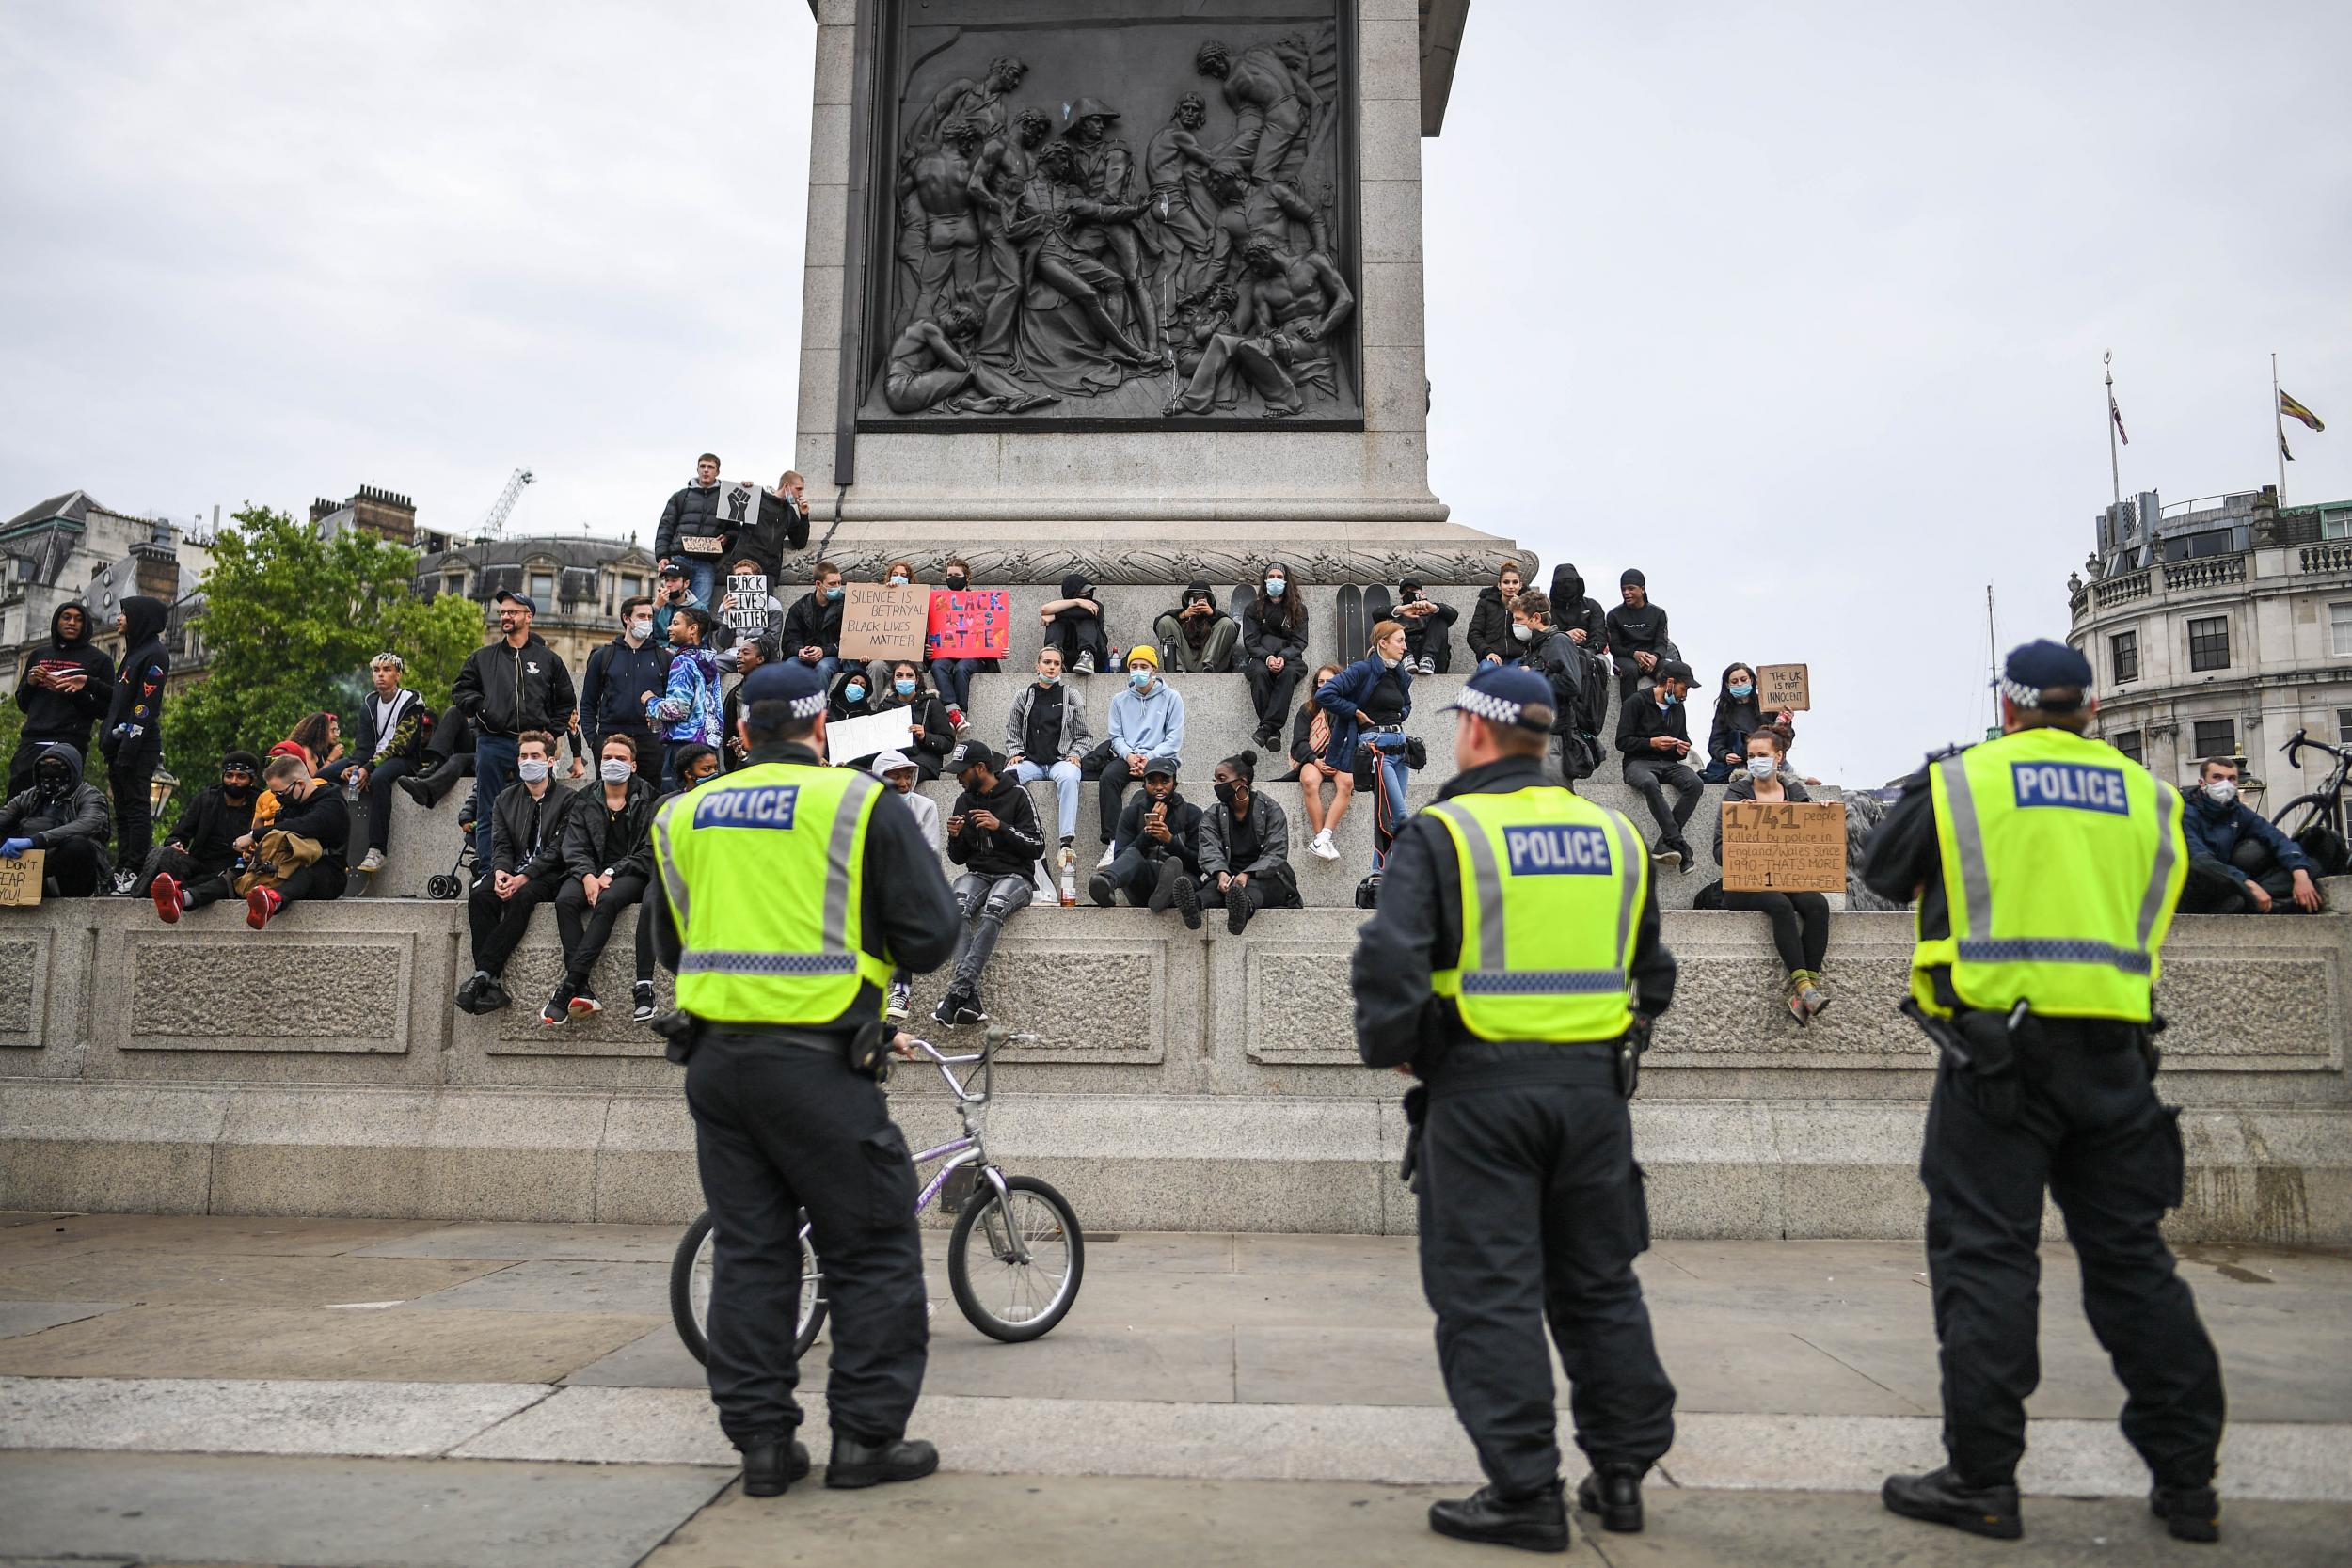 Black Lives Matter supporters gathered for a rally in Trafalgar Square (Peter Summers/Getty Images)